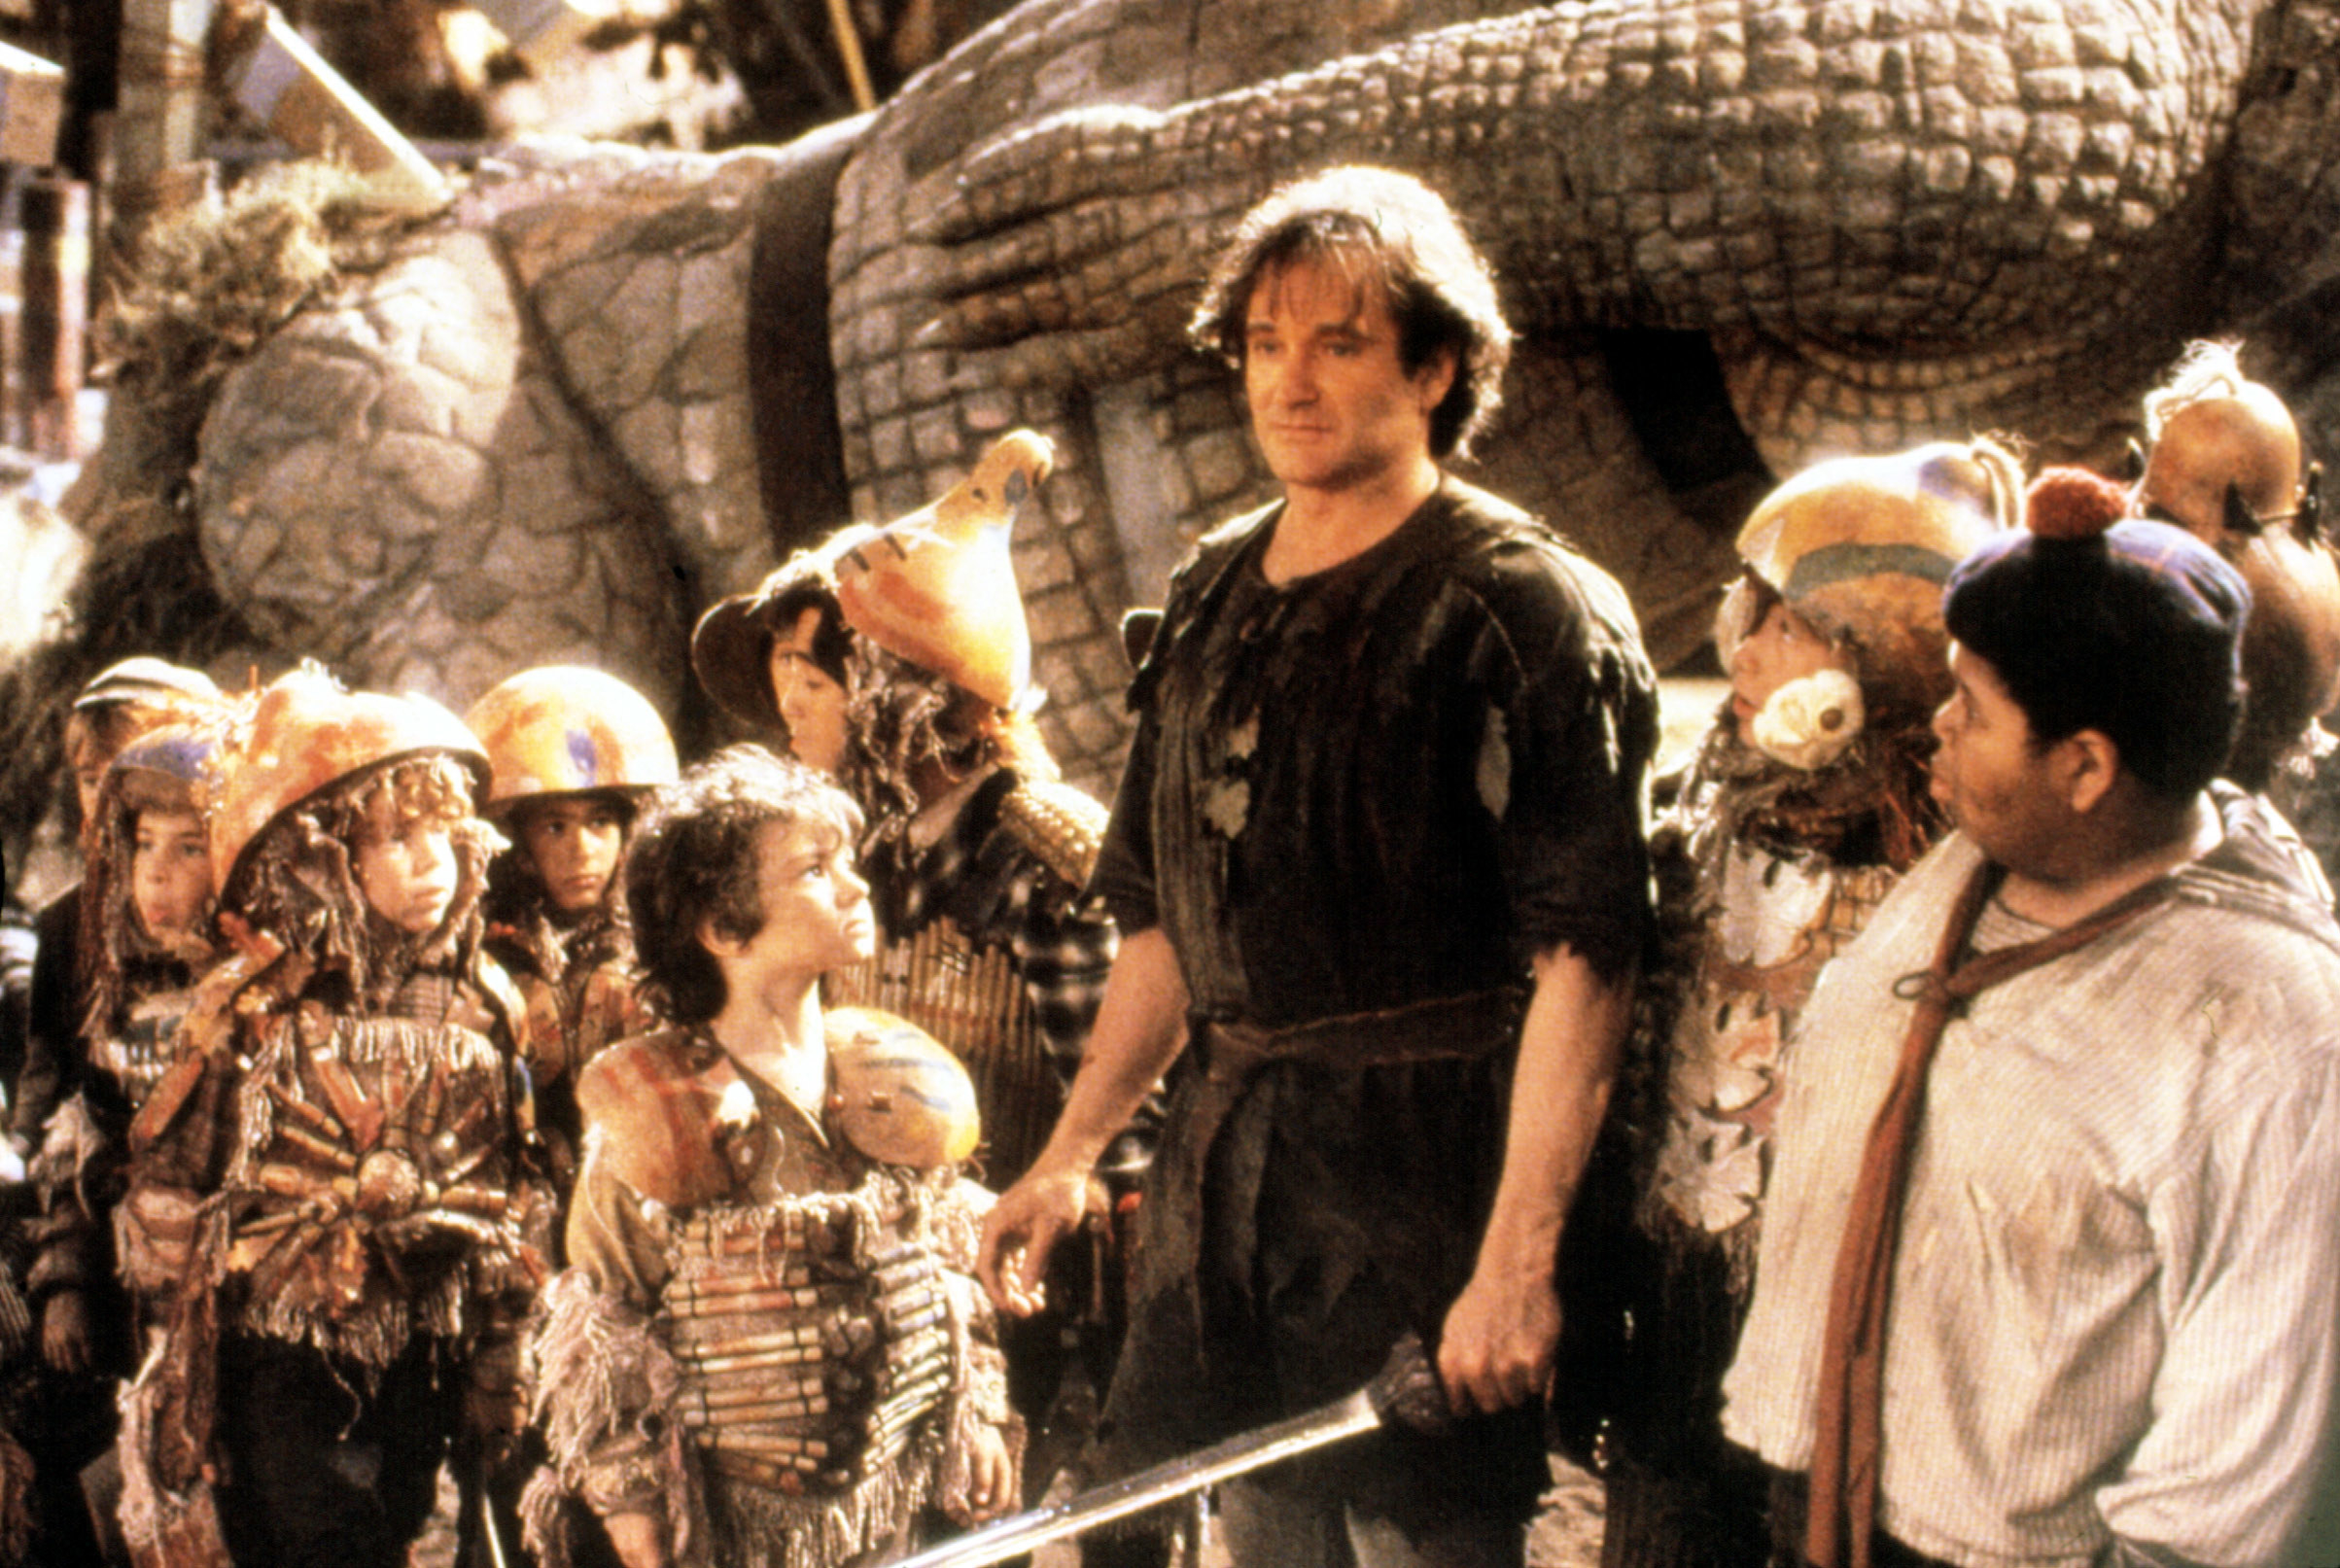 Robin Williams as Peter Pan standing with the Lost Boys